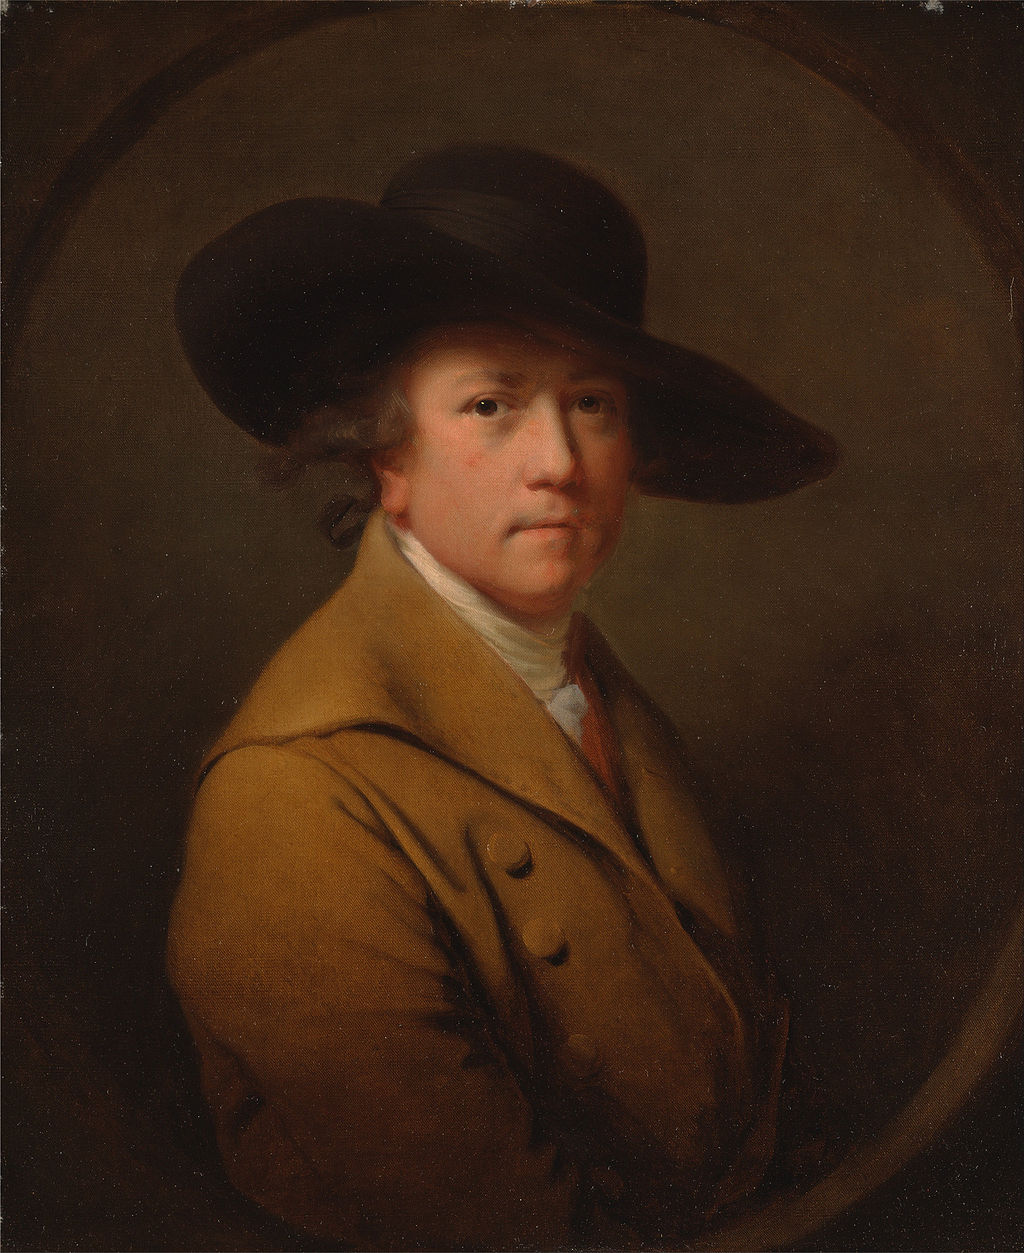 color bust portrait of a man wearing a double-breasted jacket and a black hat